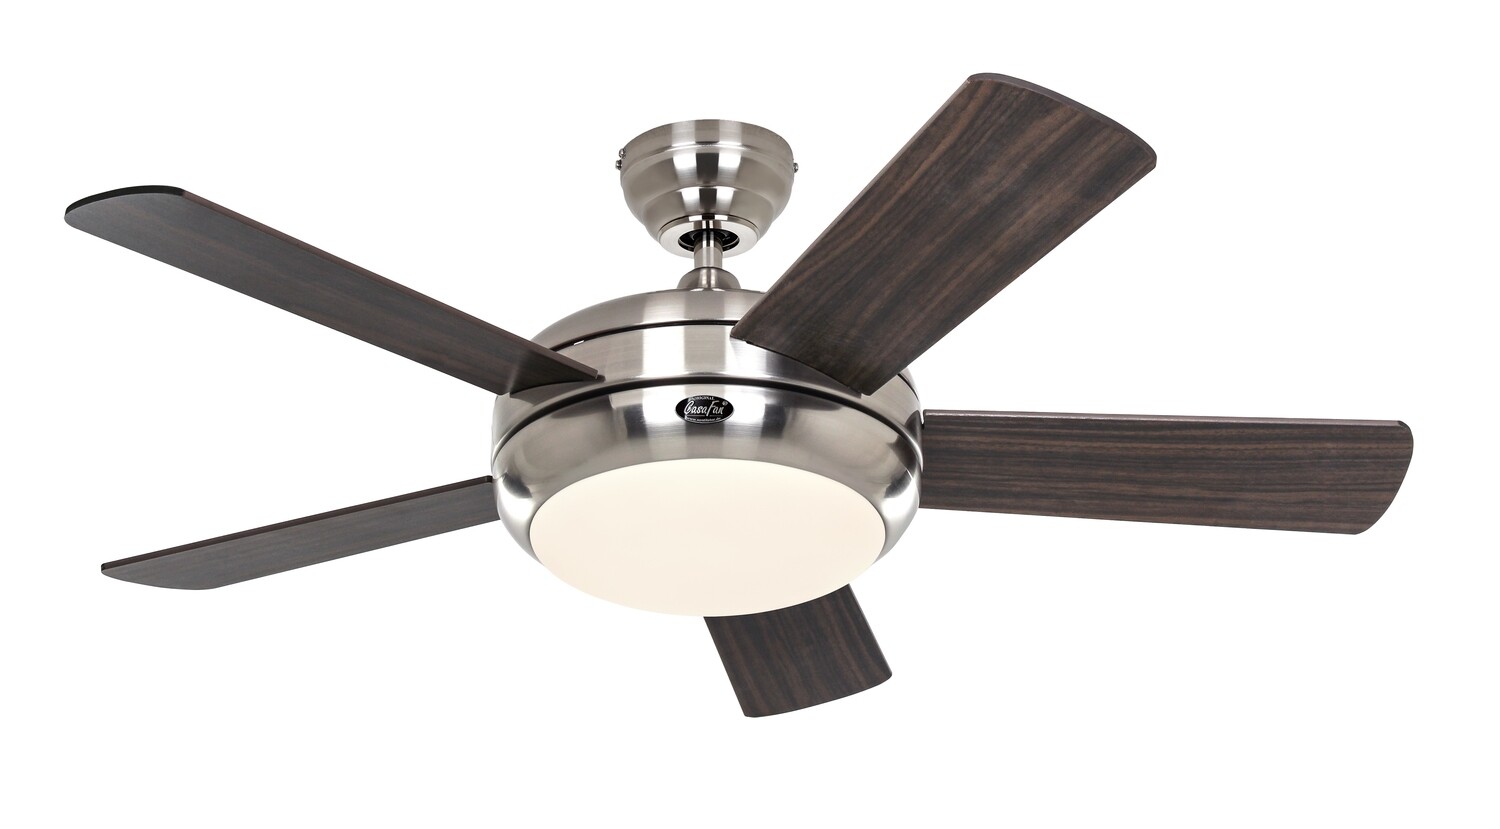 Titanium 105 BN-NB/KI ceiling fan by CASAFAN Ø105 light integrated and remote control included